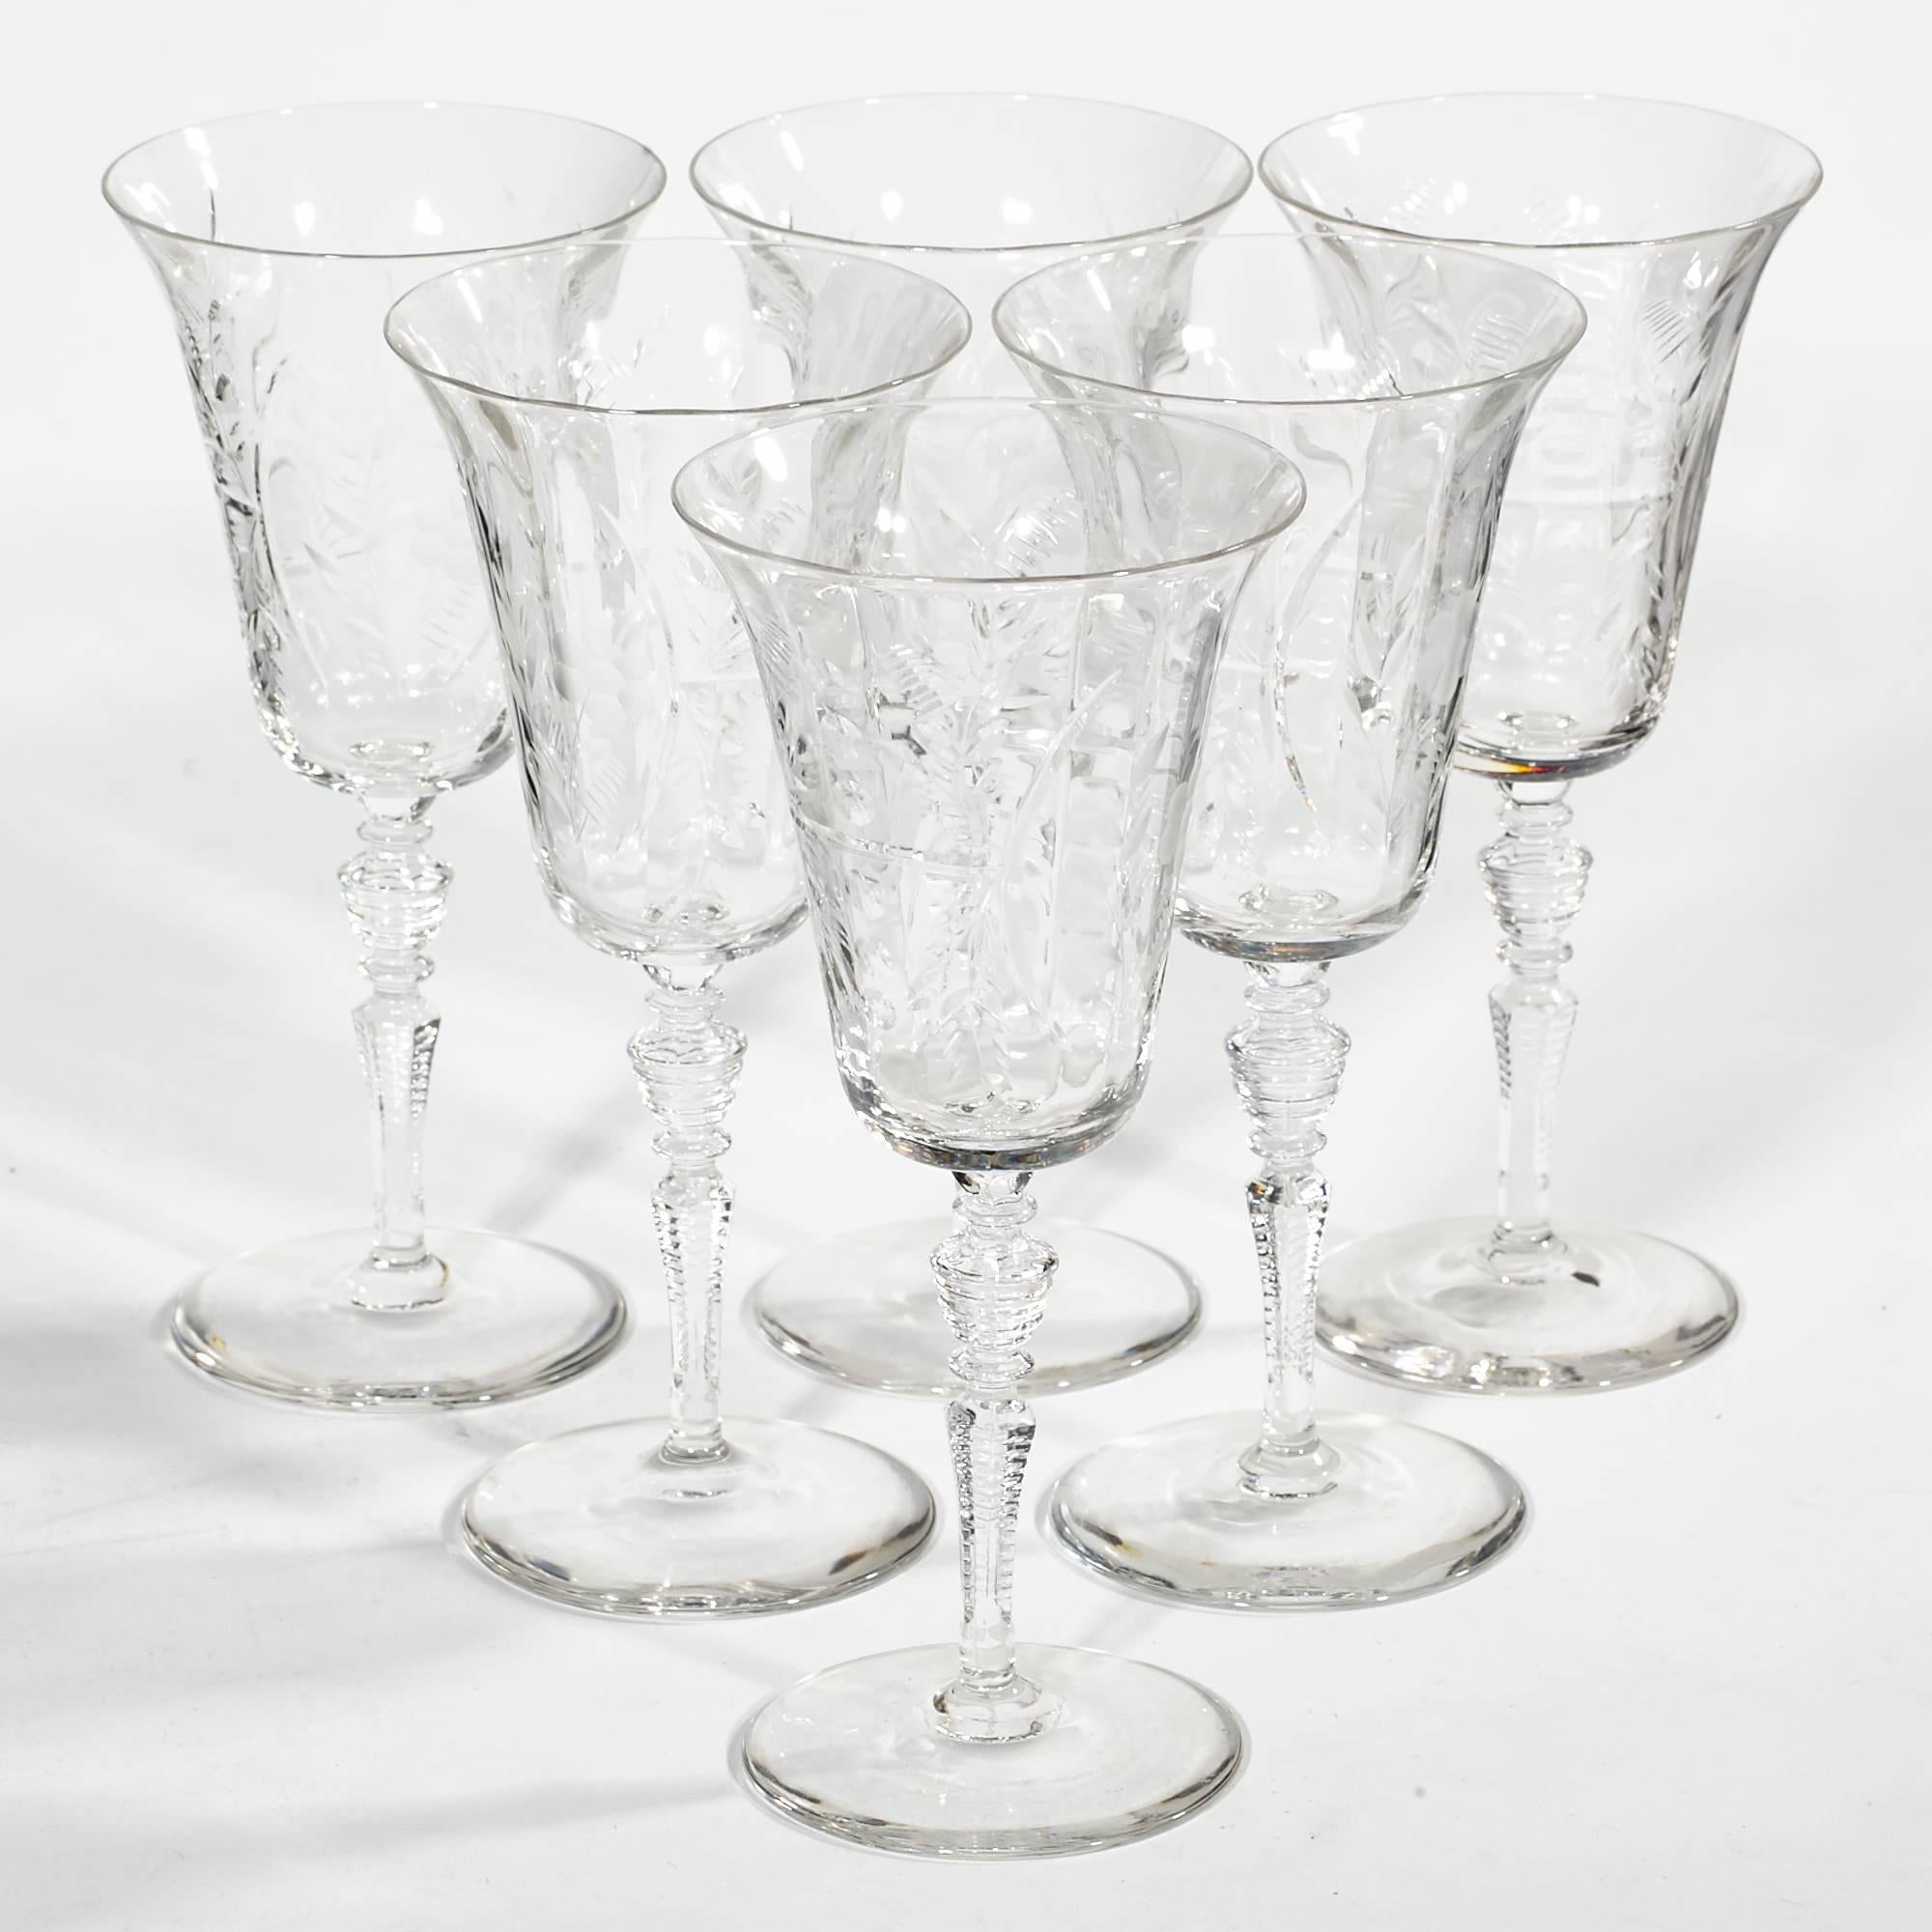 Vintage mid-20th century set of six floral wheel cut tall wine glass stems, circa 1950s. Unmarked.